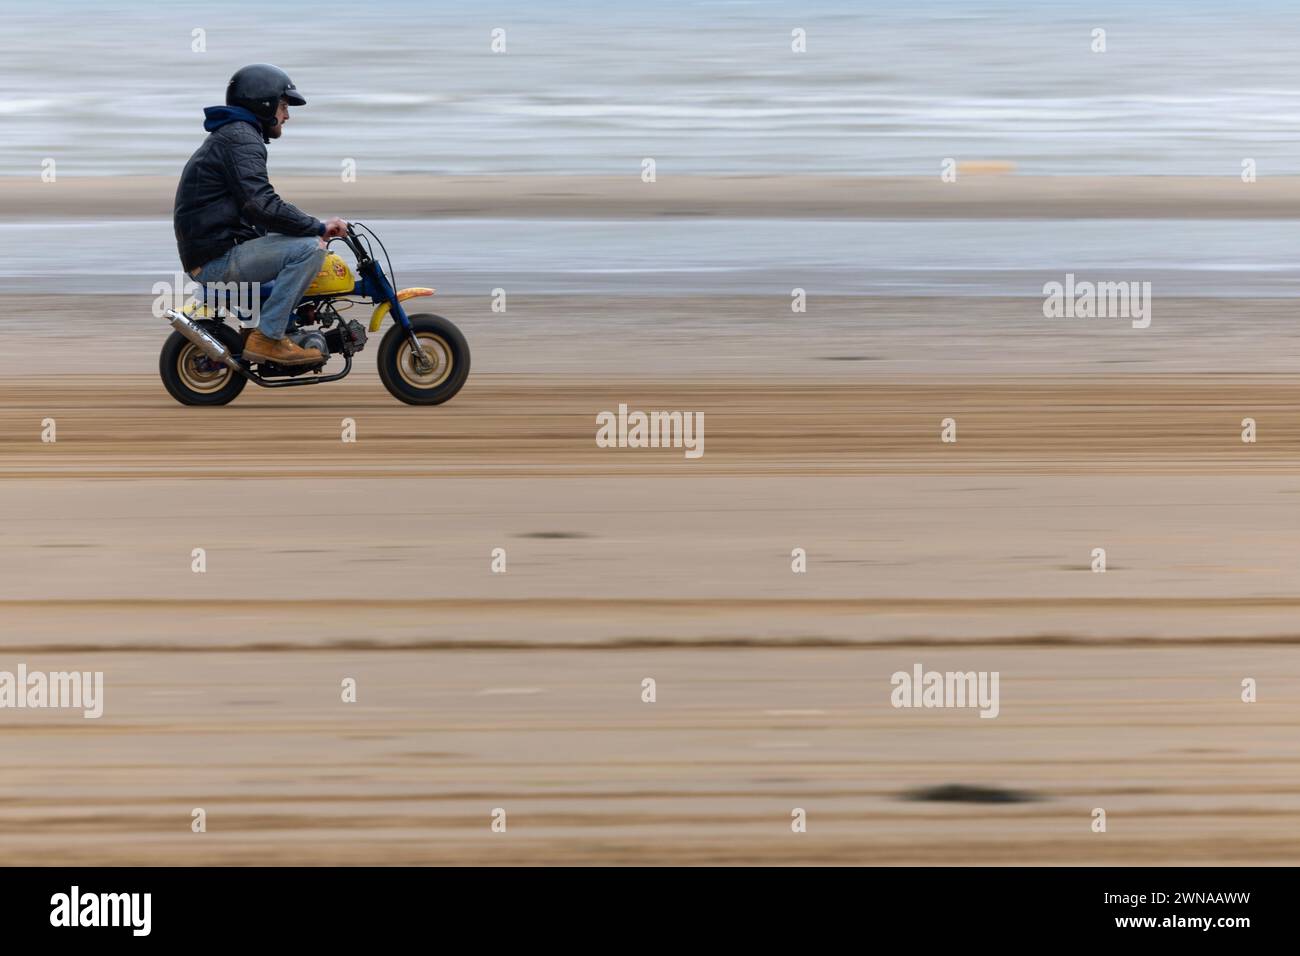 14/03/23   Competitors take part in the Malle Mile Beach Race on Margate beach, Kent. More than 250 riders took to the sands to race a selection of cu Stock Photo